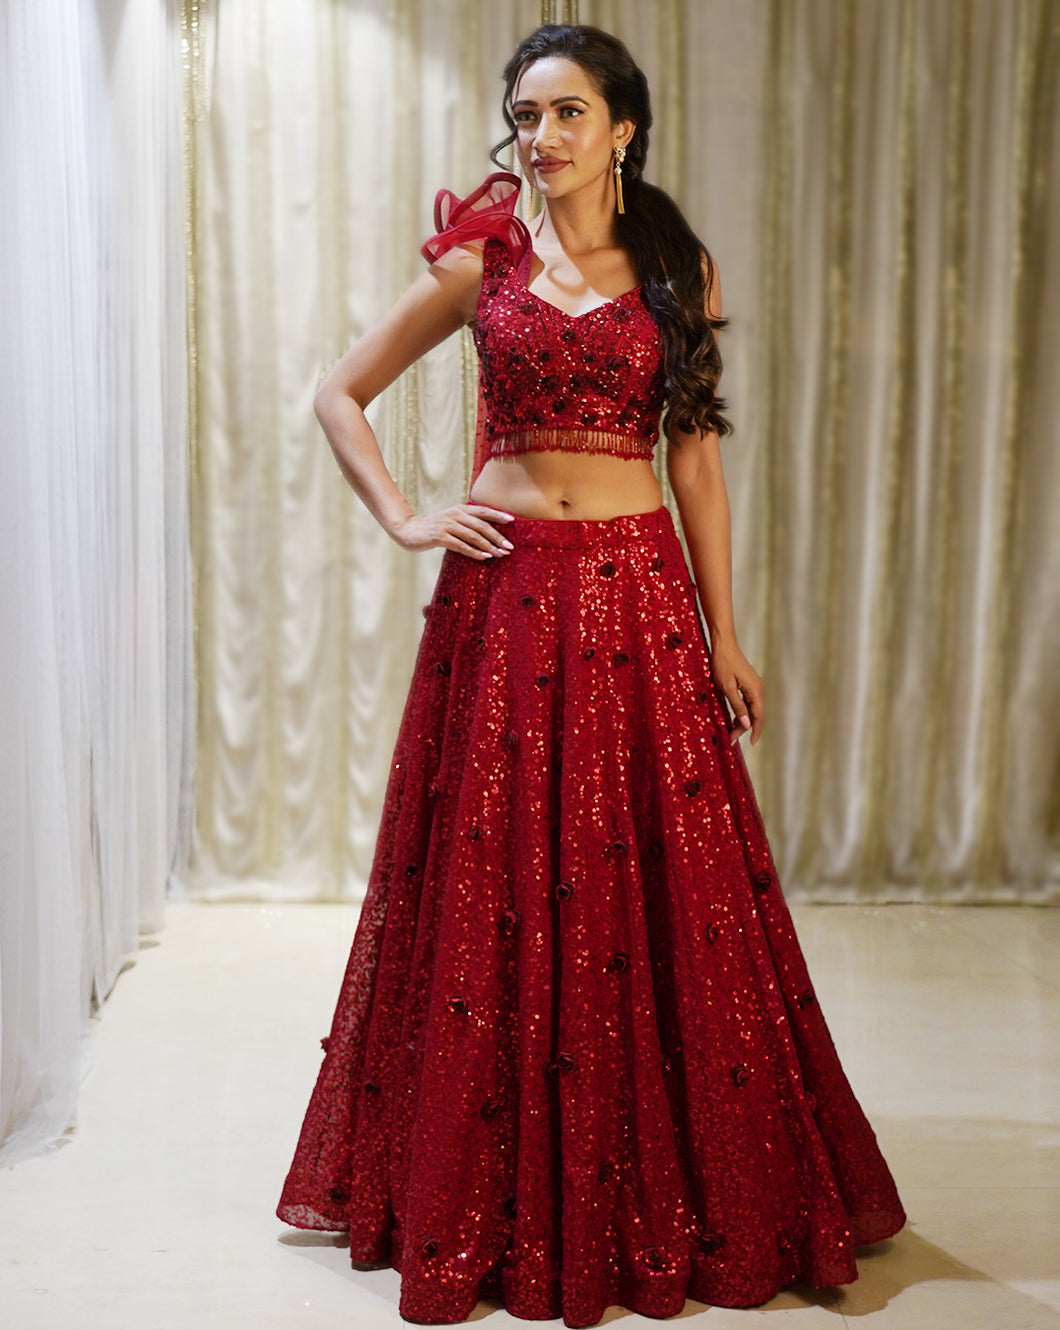 The Sequence Floral Lehenga